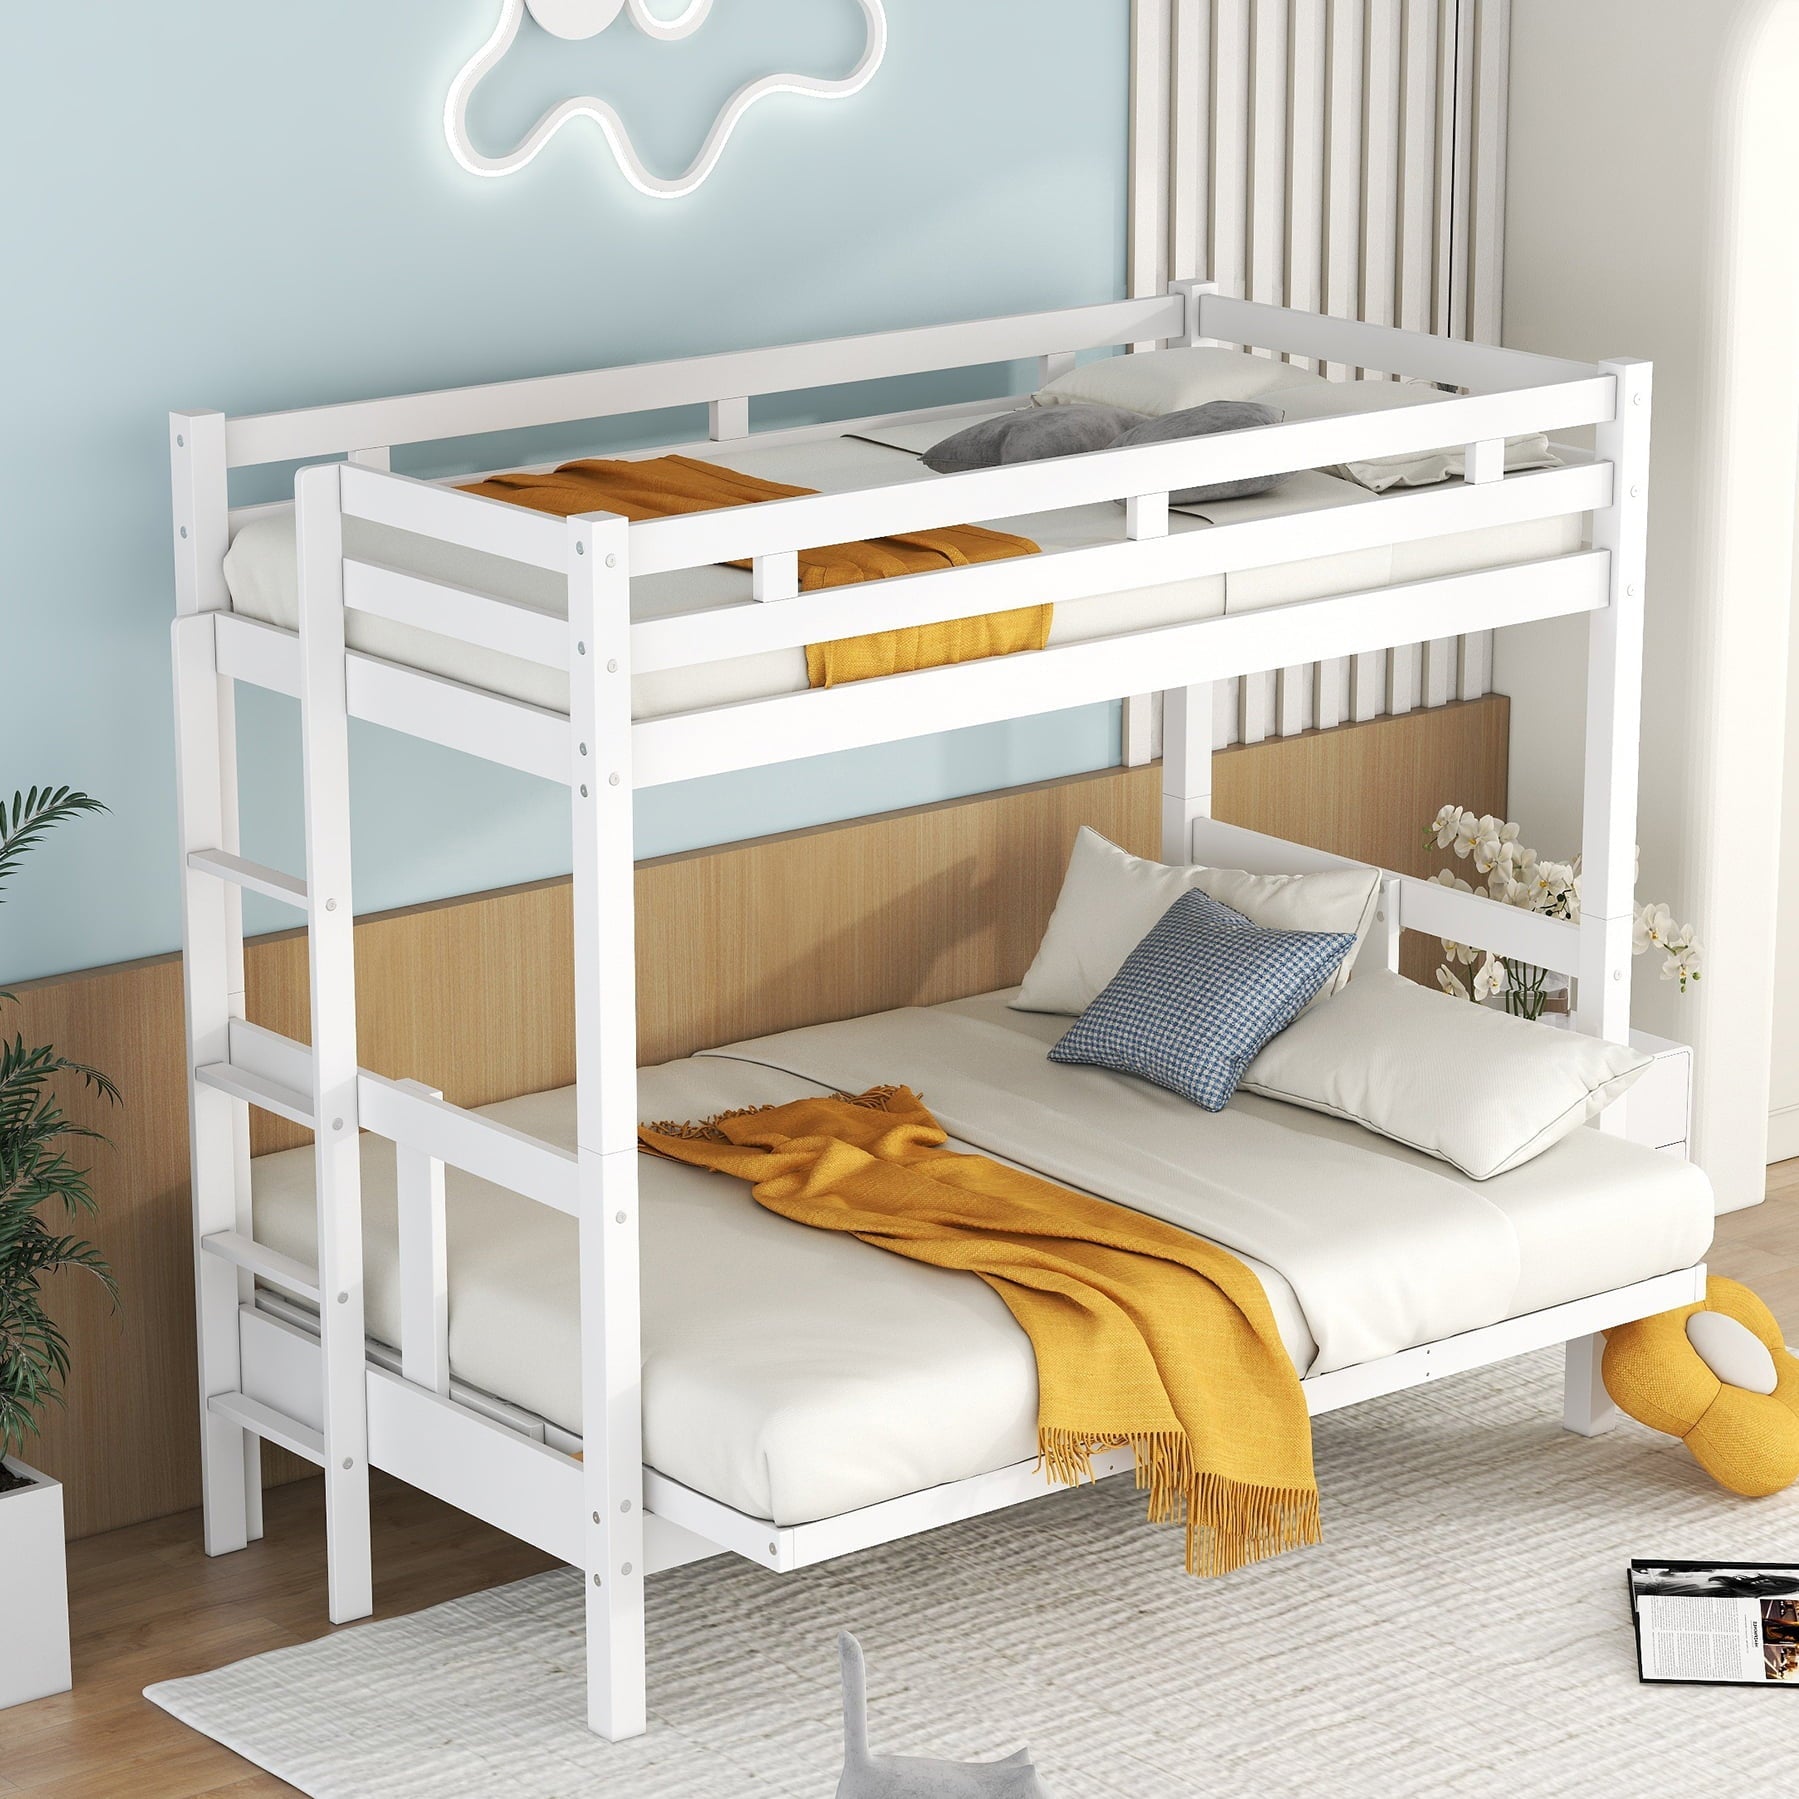 Bellemave Twin Over Full/Futon Bunk Beds, Wood Bunk Bed Frame can be Converted into Couch, 2 in 1 Detachable Bunk Bed for Kids Teens Adults (White)